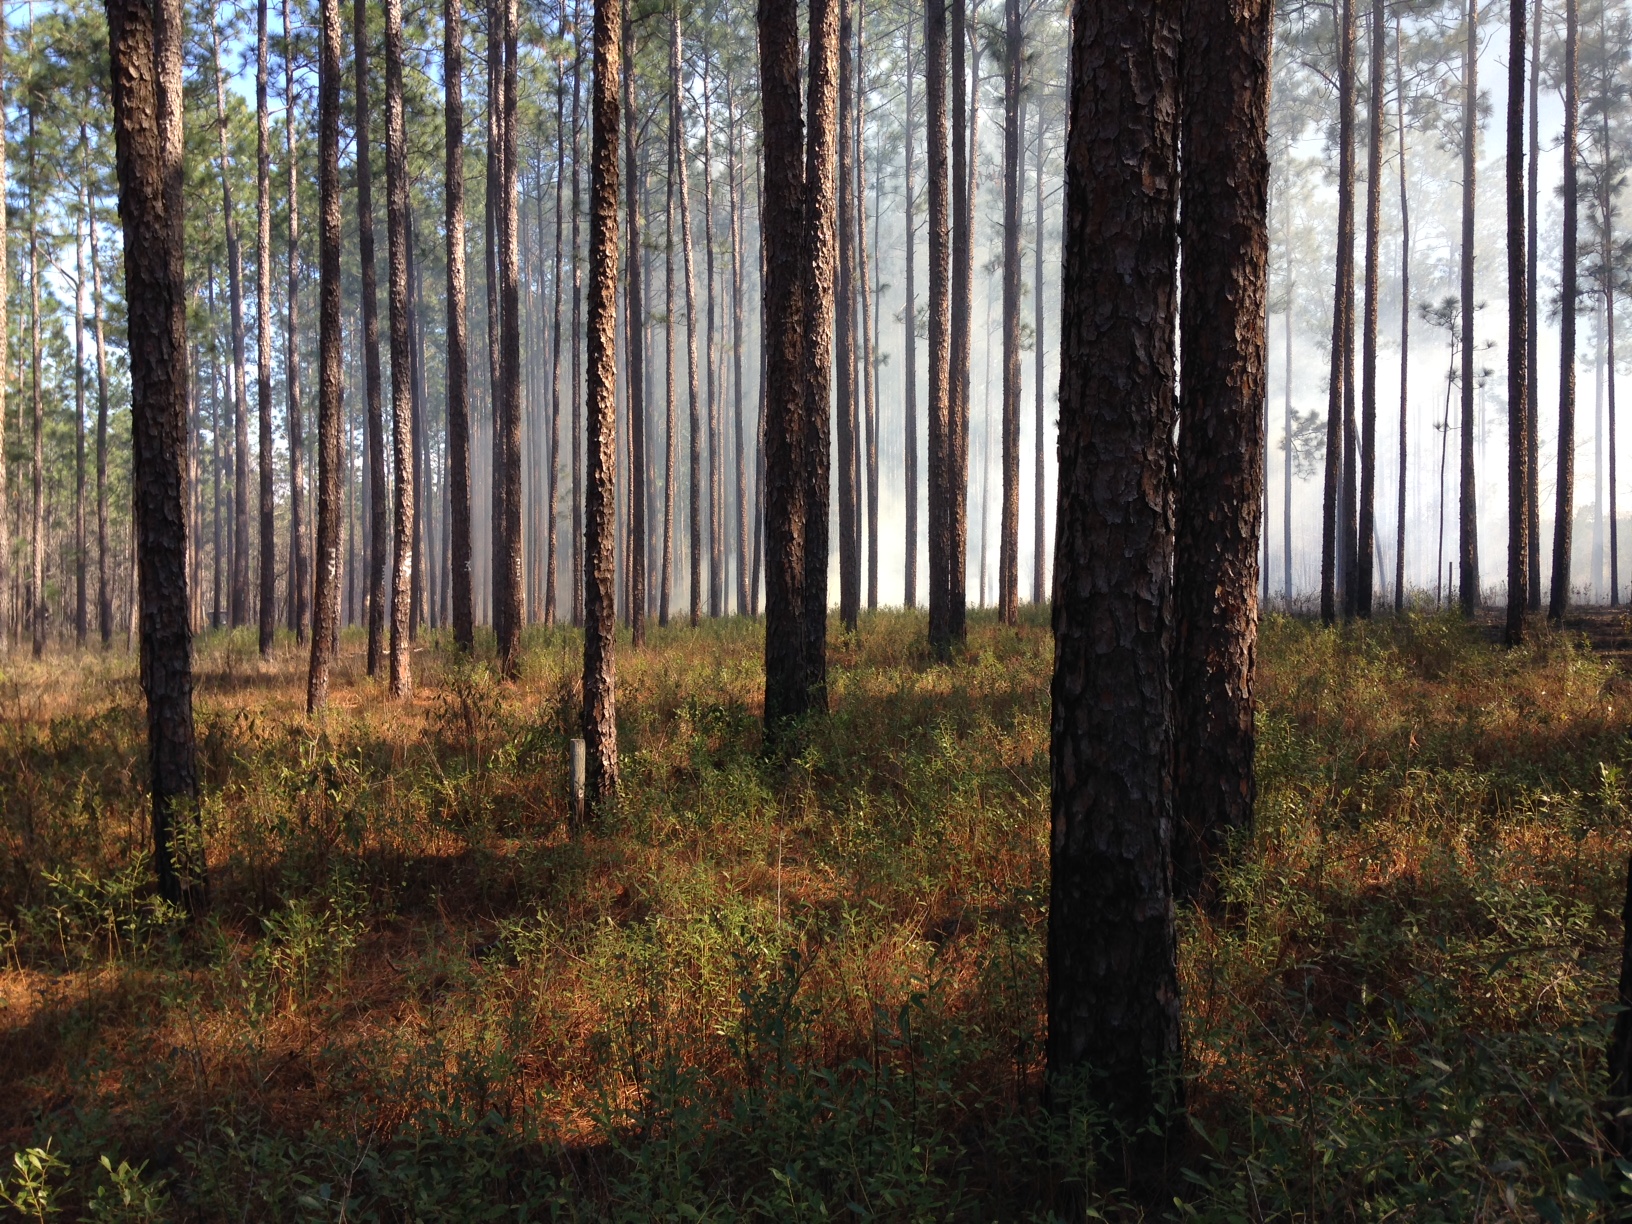 Photo of a pine forest ecosystem.